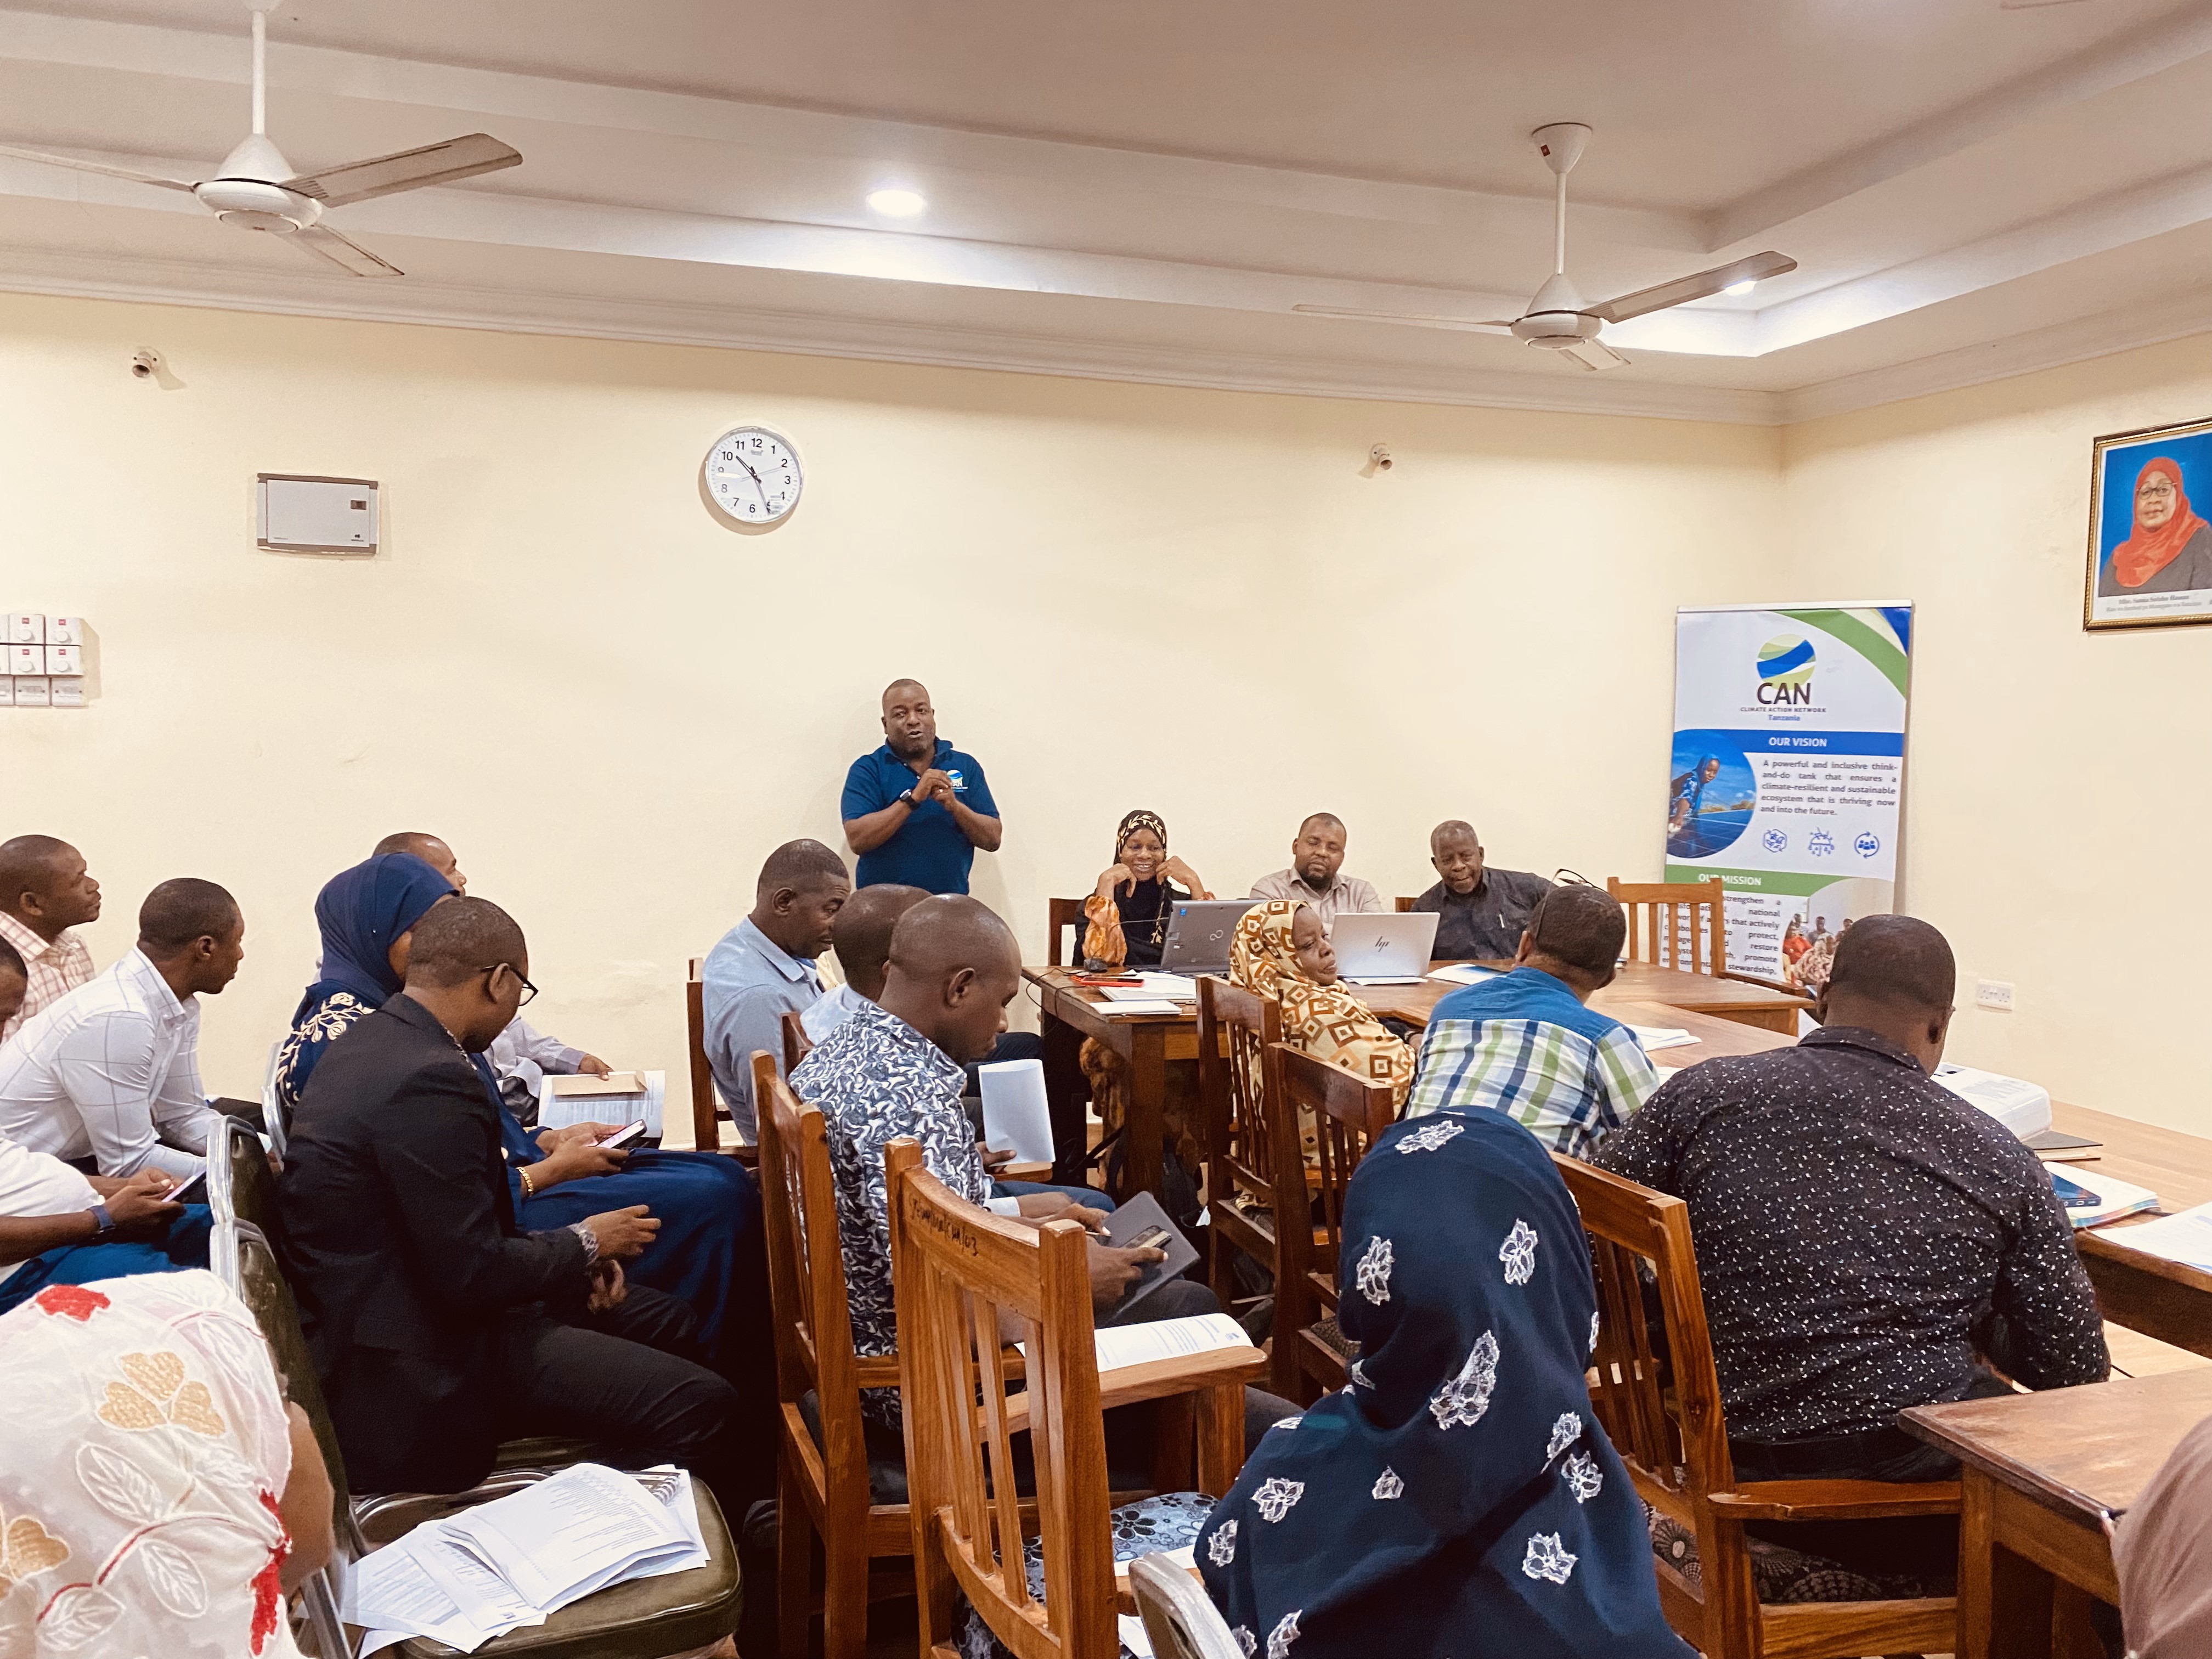 Shaping the Future Environment of Zanzibar Through an Inclusive and Participatory Policy Review